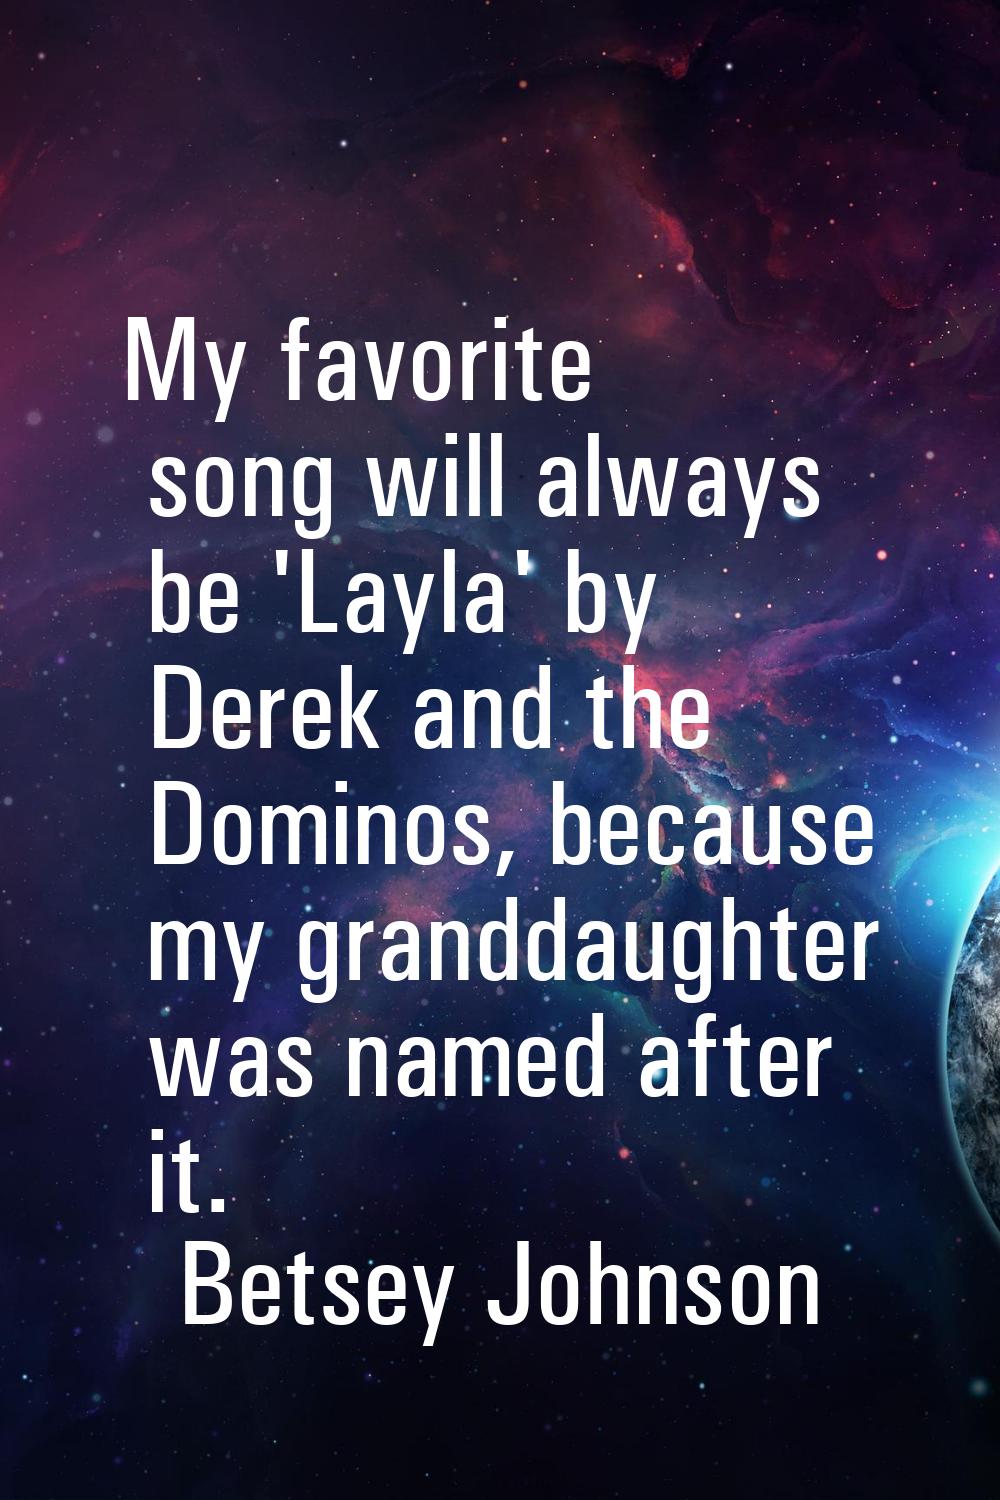 My favorite song will always be 'Layla' by Derek and the Dominos, because my granddaughter was name